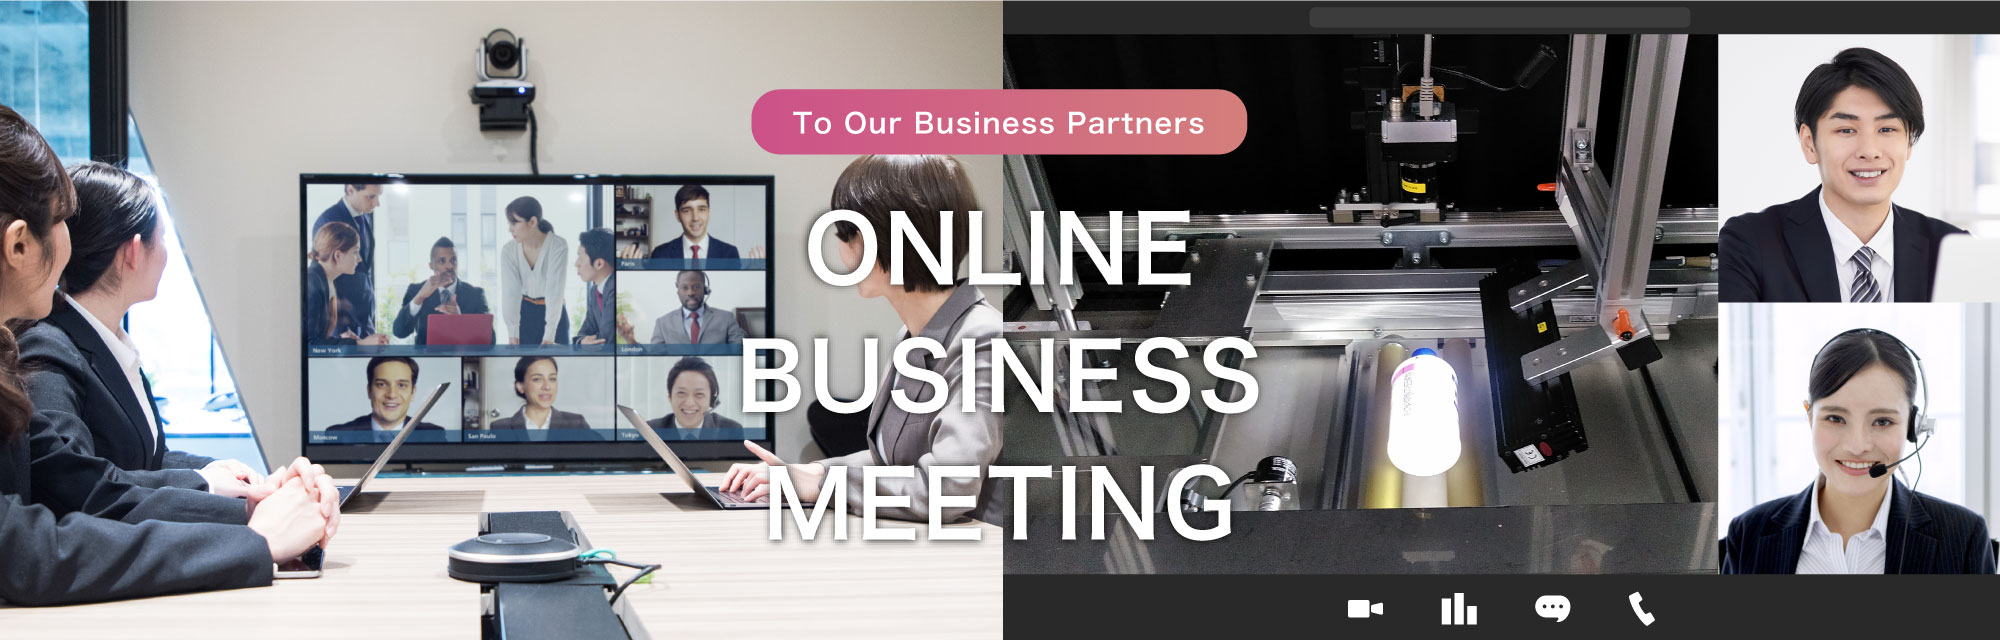 To Our Business Partners ONLINE BUSINESS MEETING